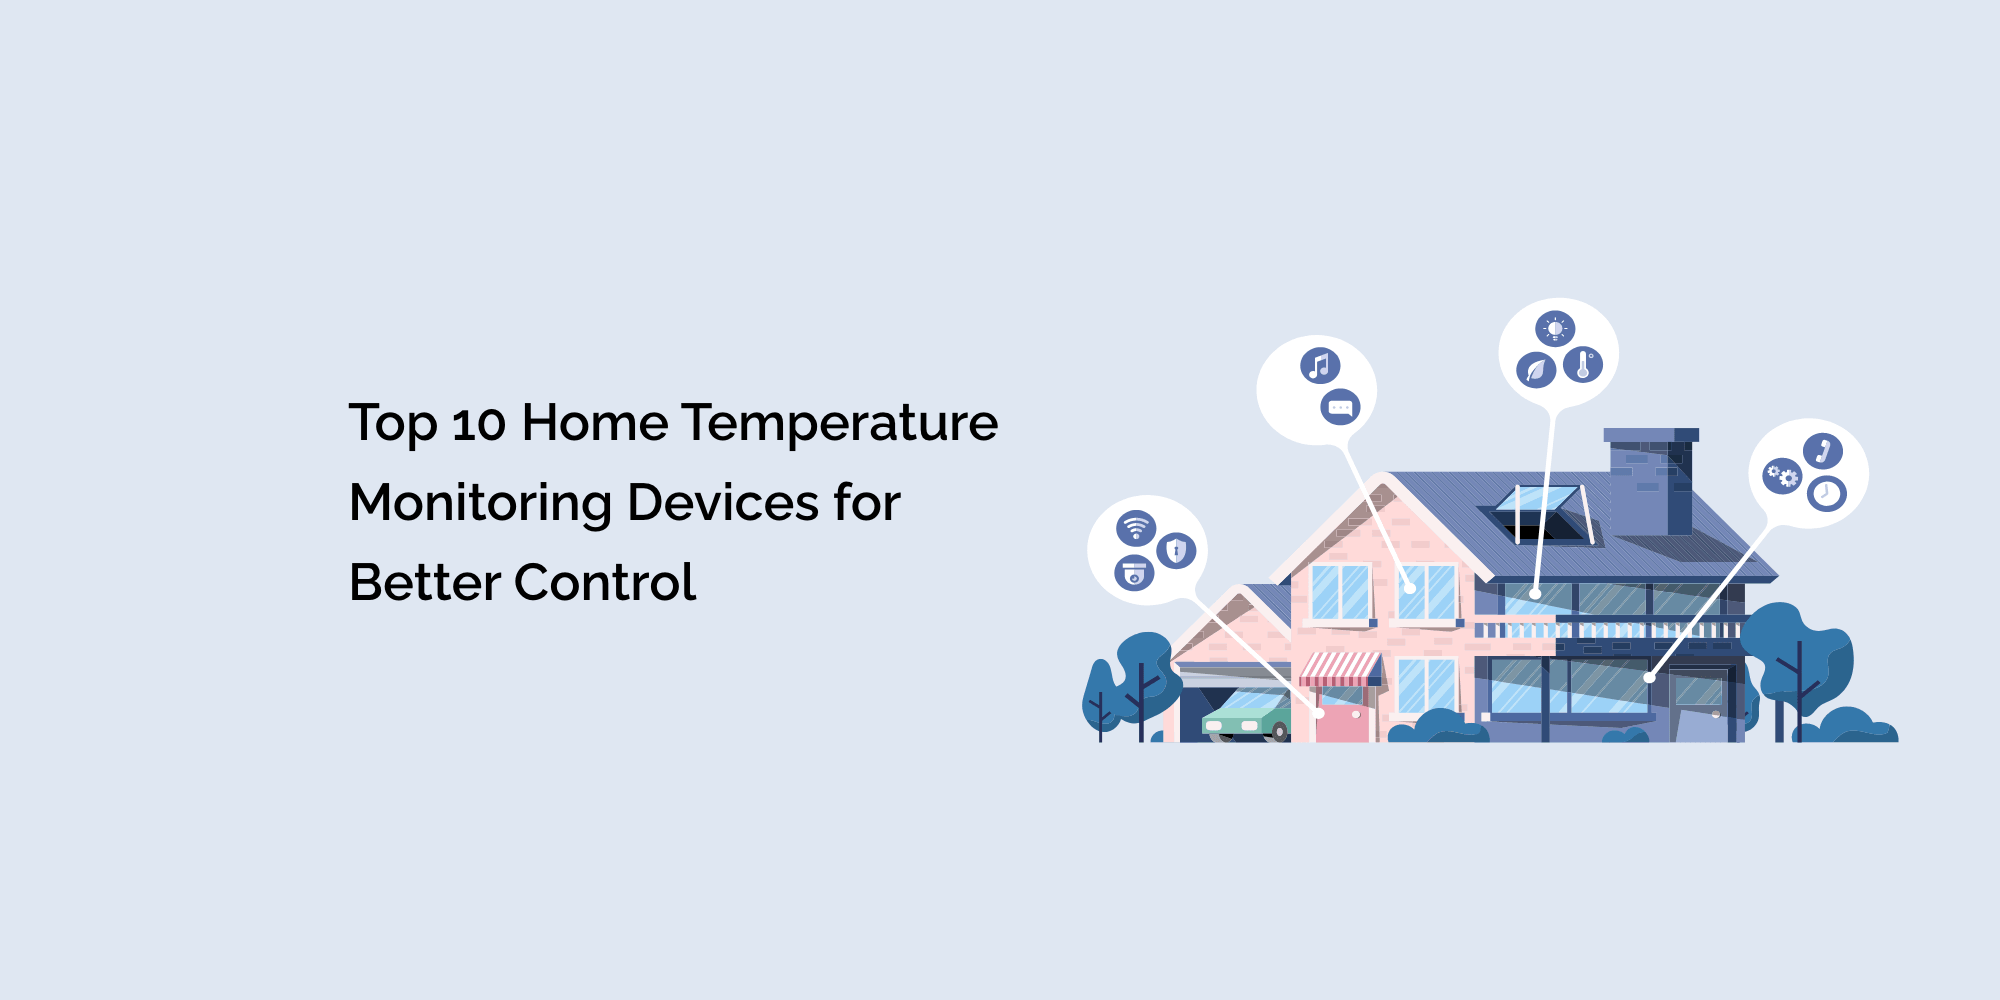 Top 10 Home Temperature Monitoring Devices for Better Control